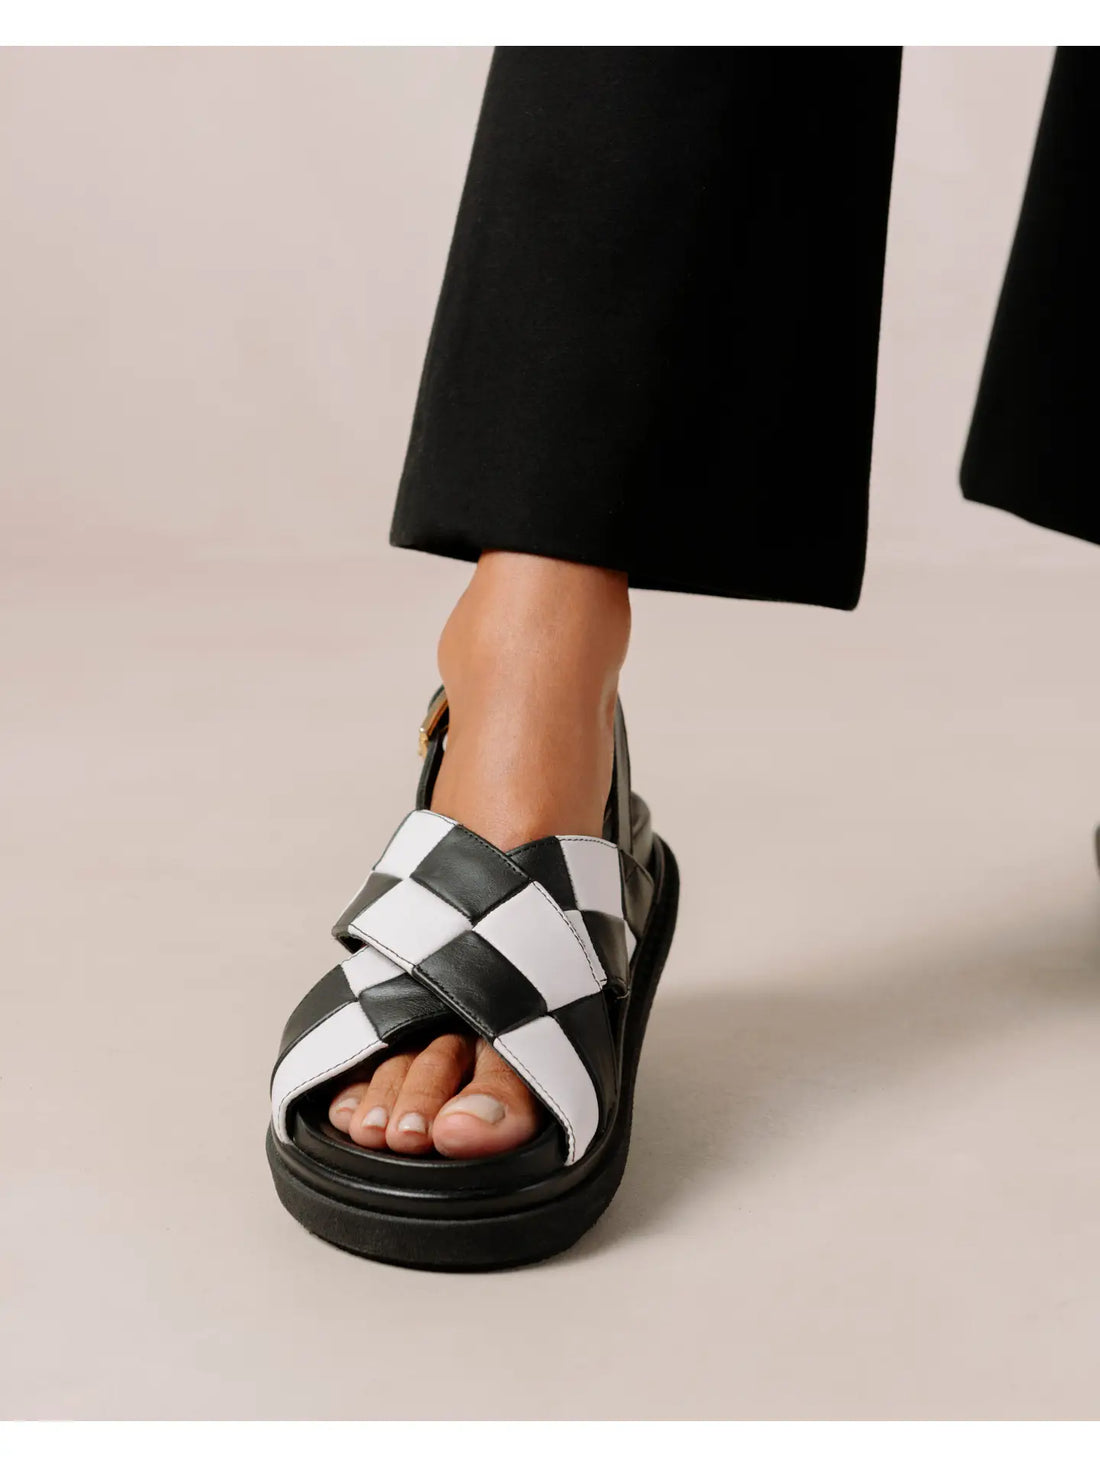 ALOHAS handcrafted, customer favorite marshmallow scacchi sandals in black and white checkered pattern